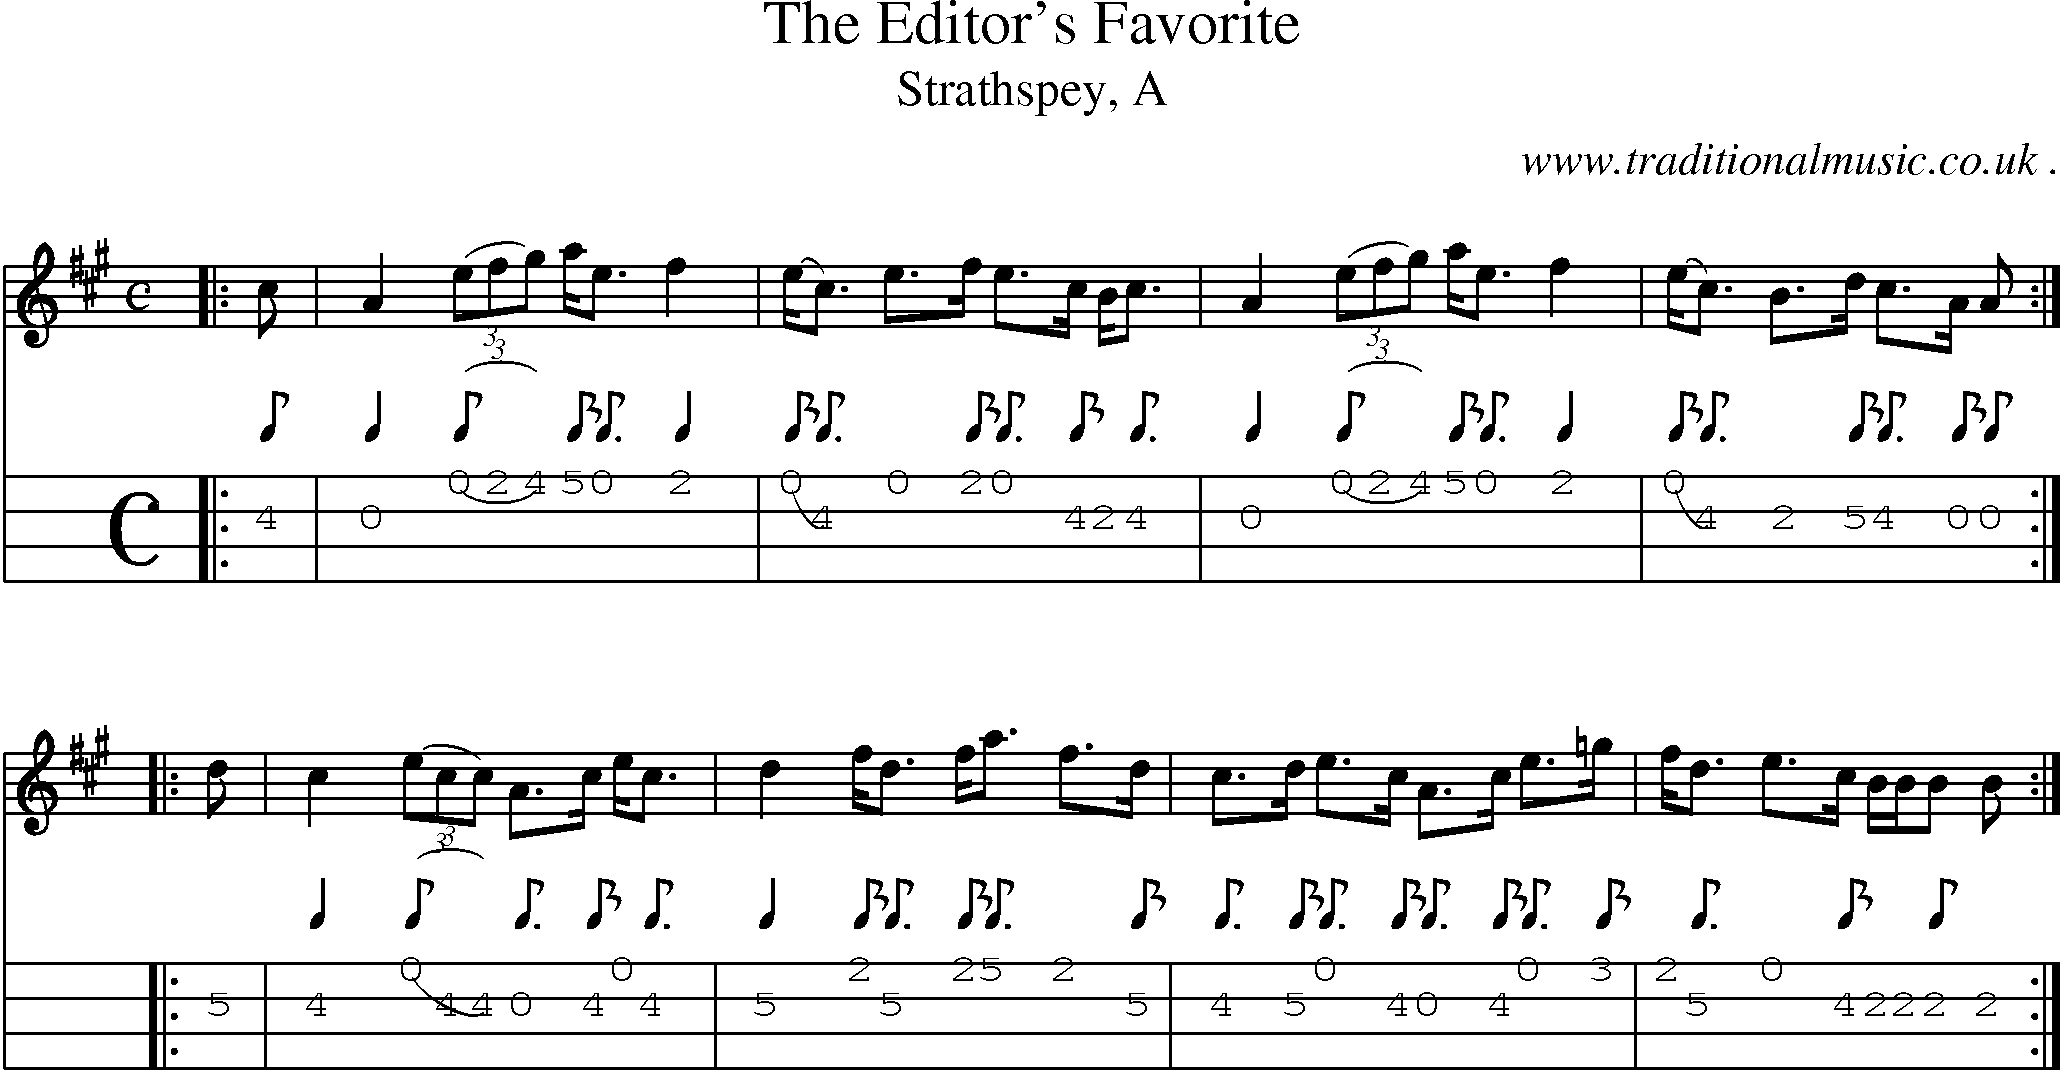 Sheet-music  score, Chords and Mandolin Tabs for The Editors Favorite